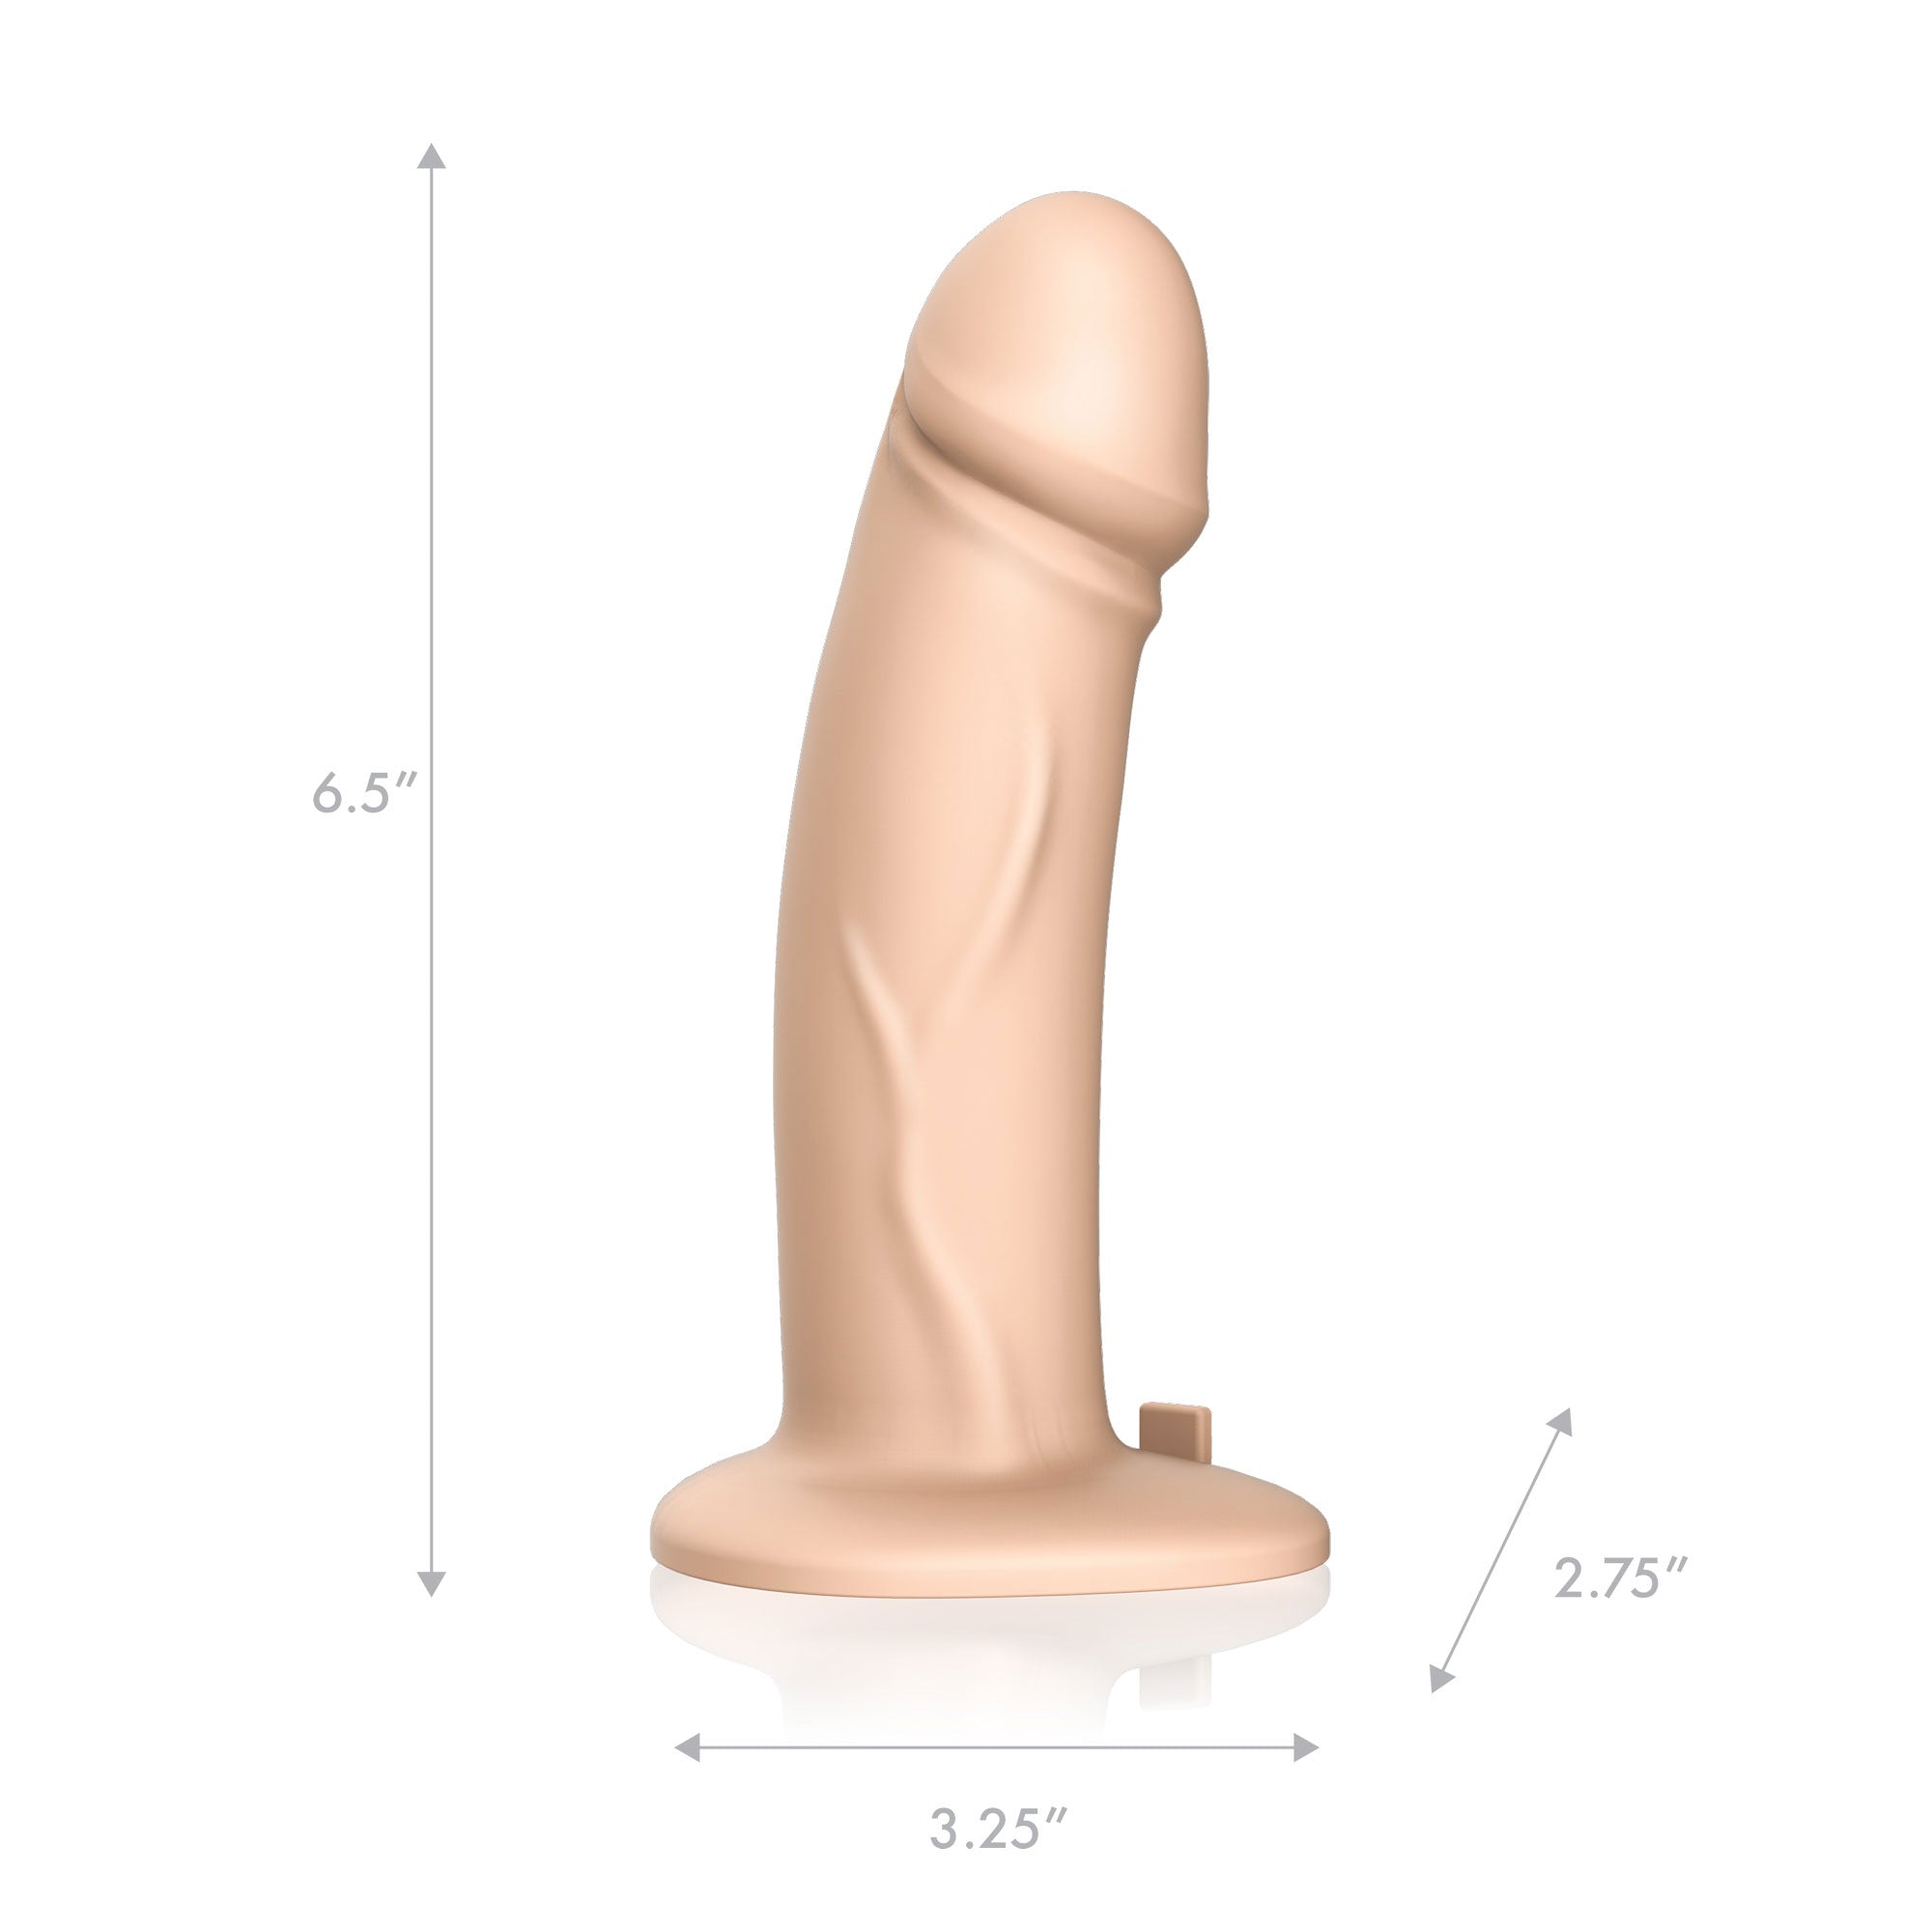 Pegasus 6.5" Realistic Silicone Vibrating Pegging Dildo with Remote Control and Adjustable Harness at glastoy.com